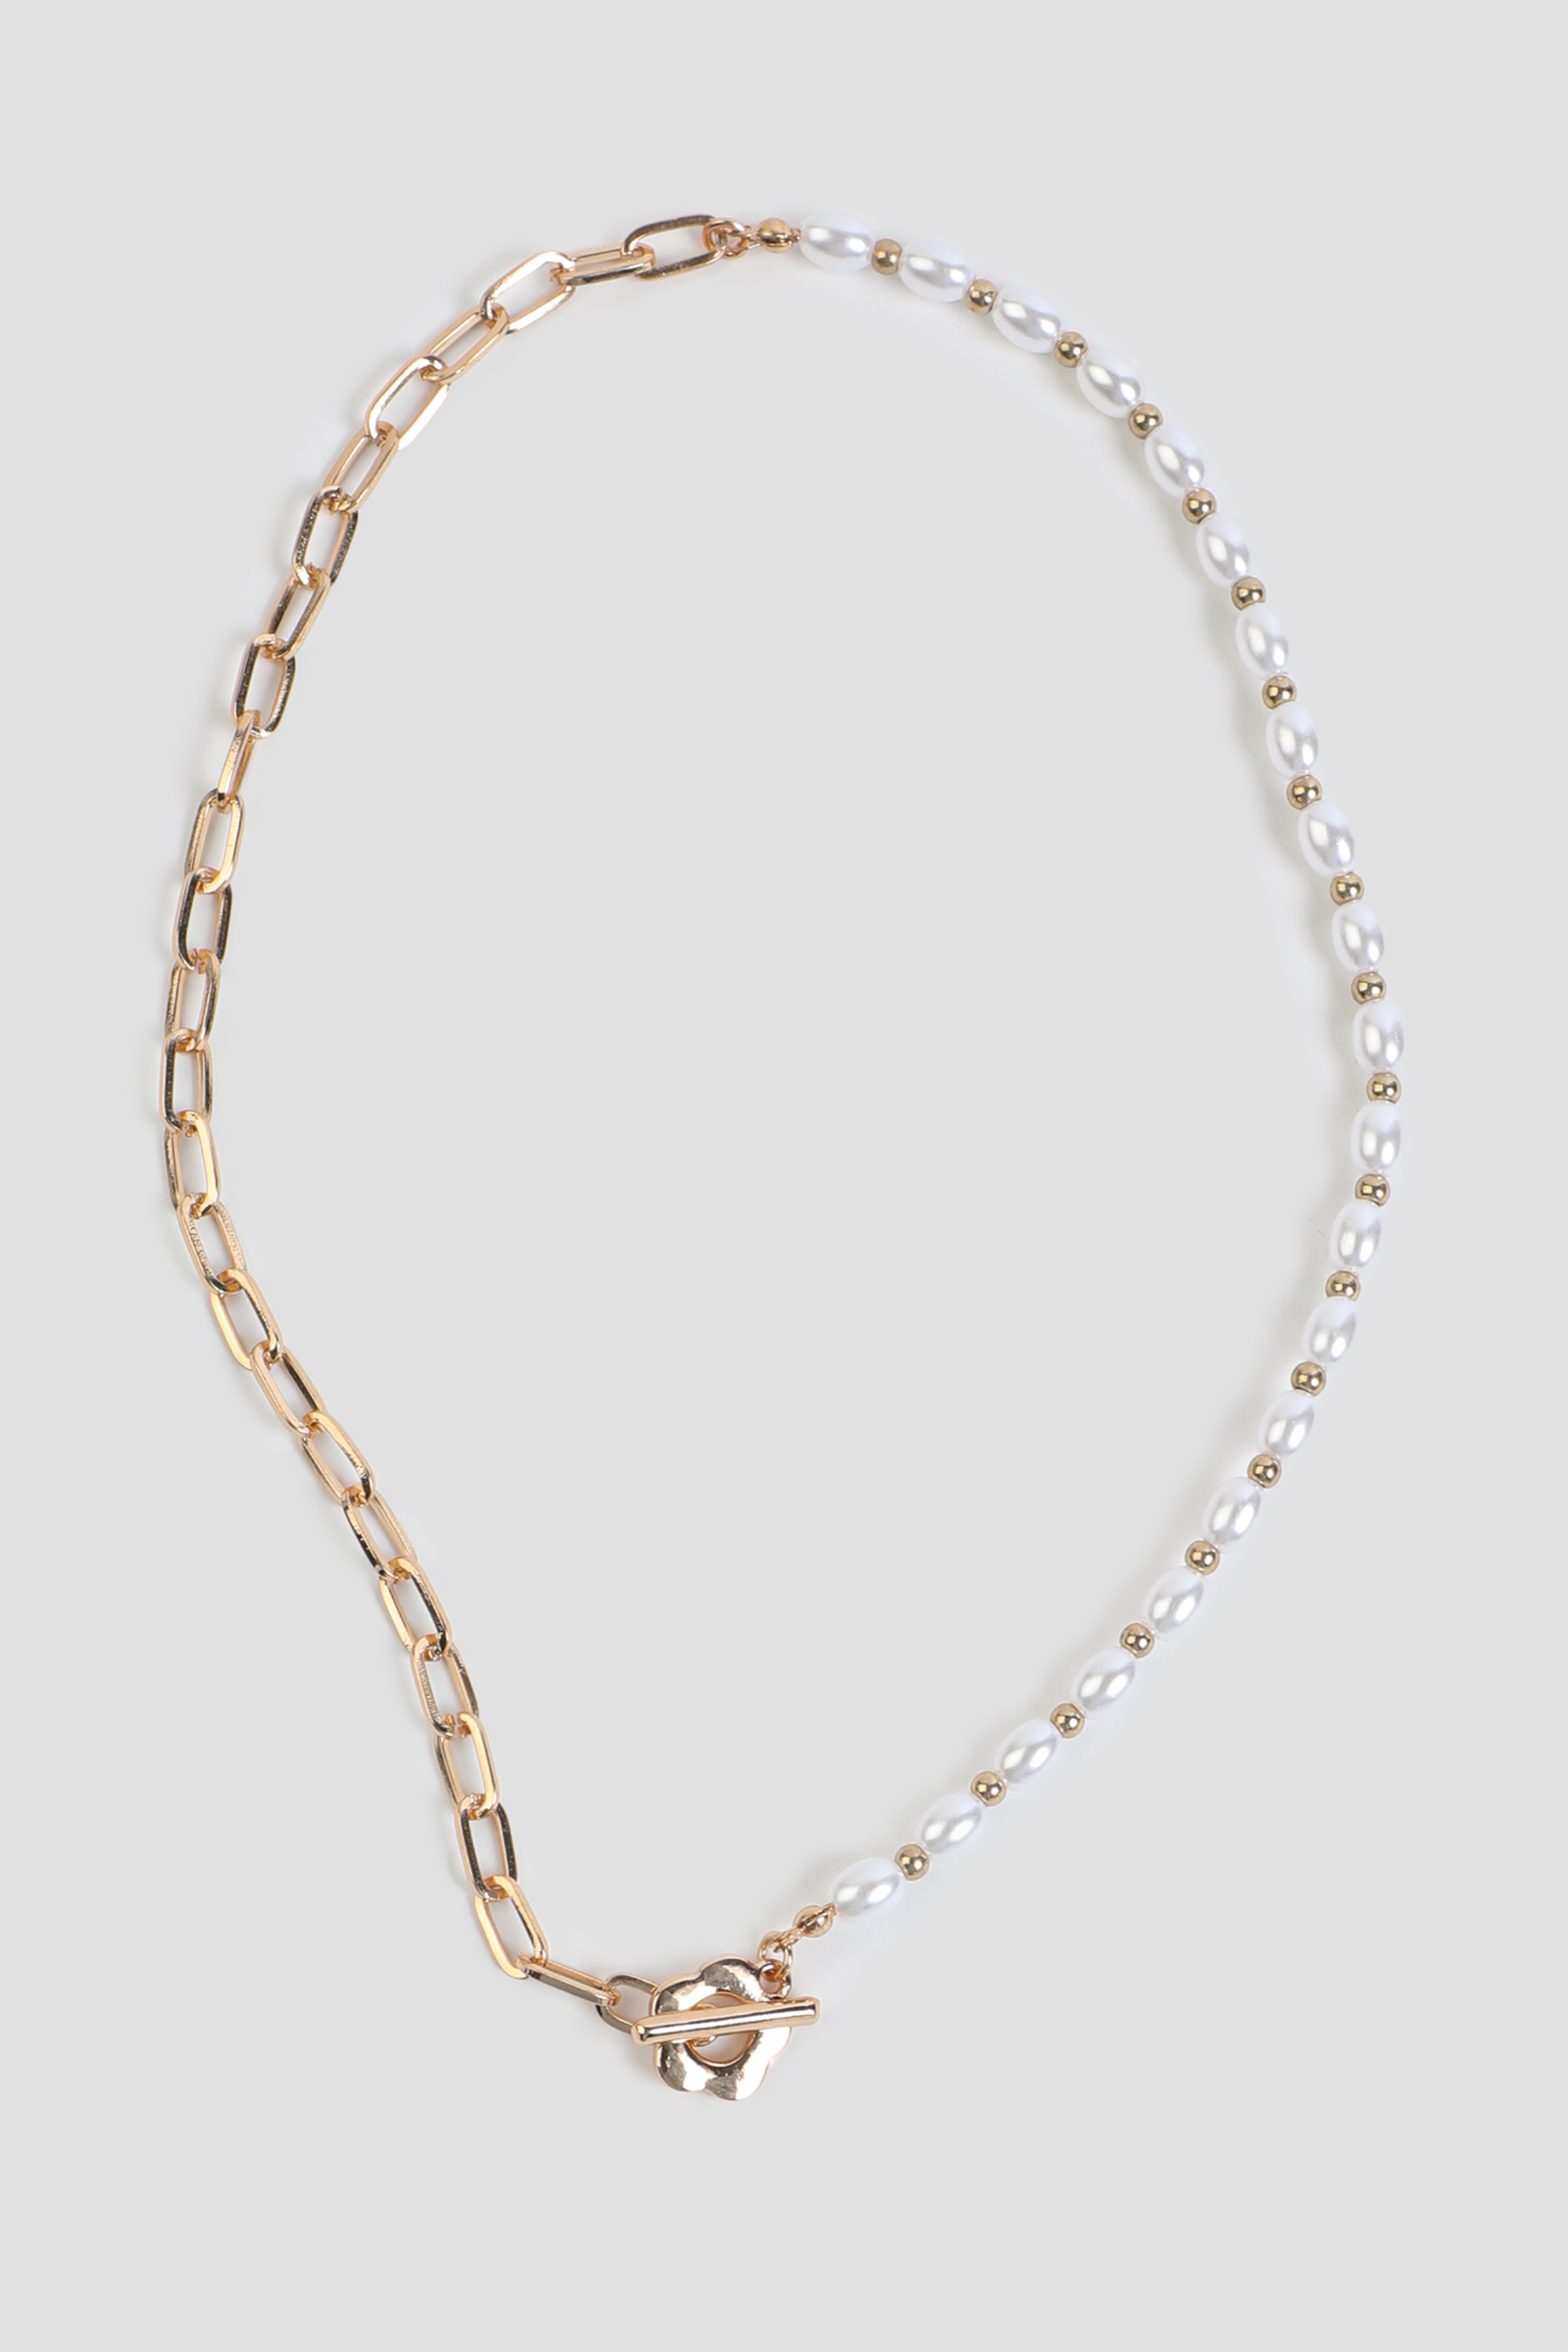 Ardene Pearl & Chain Necklace with Daisy Toggle in Gold